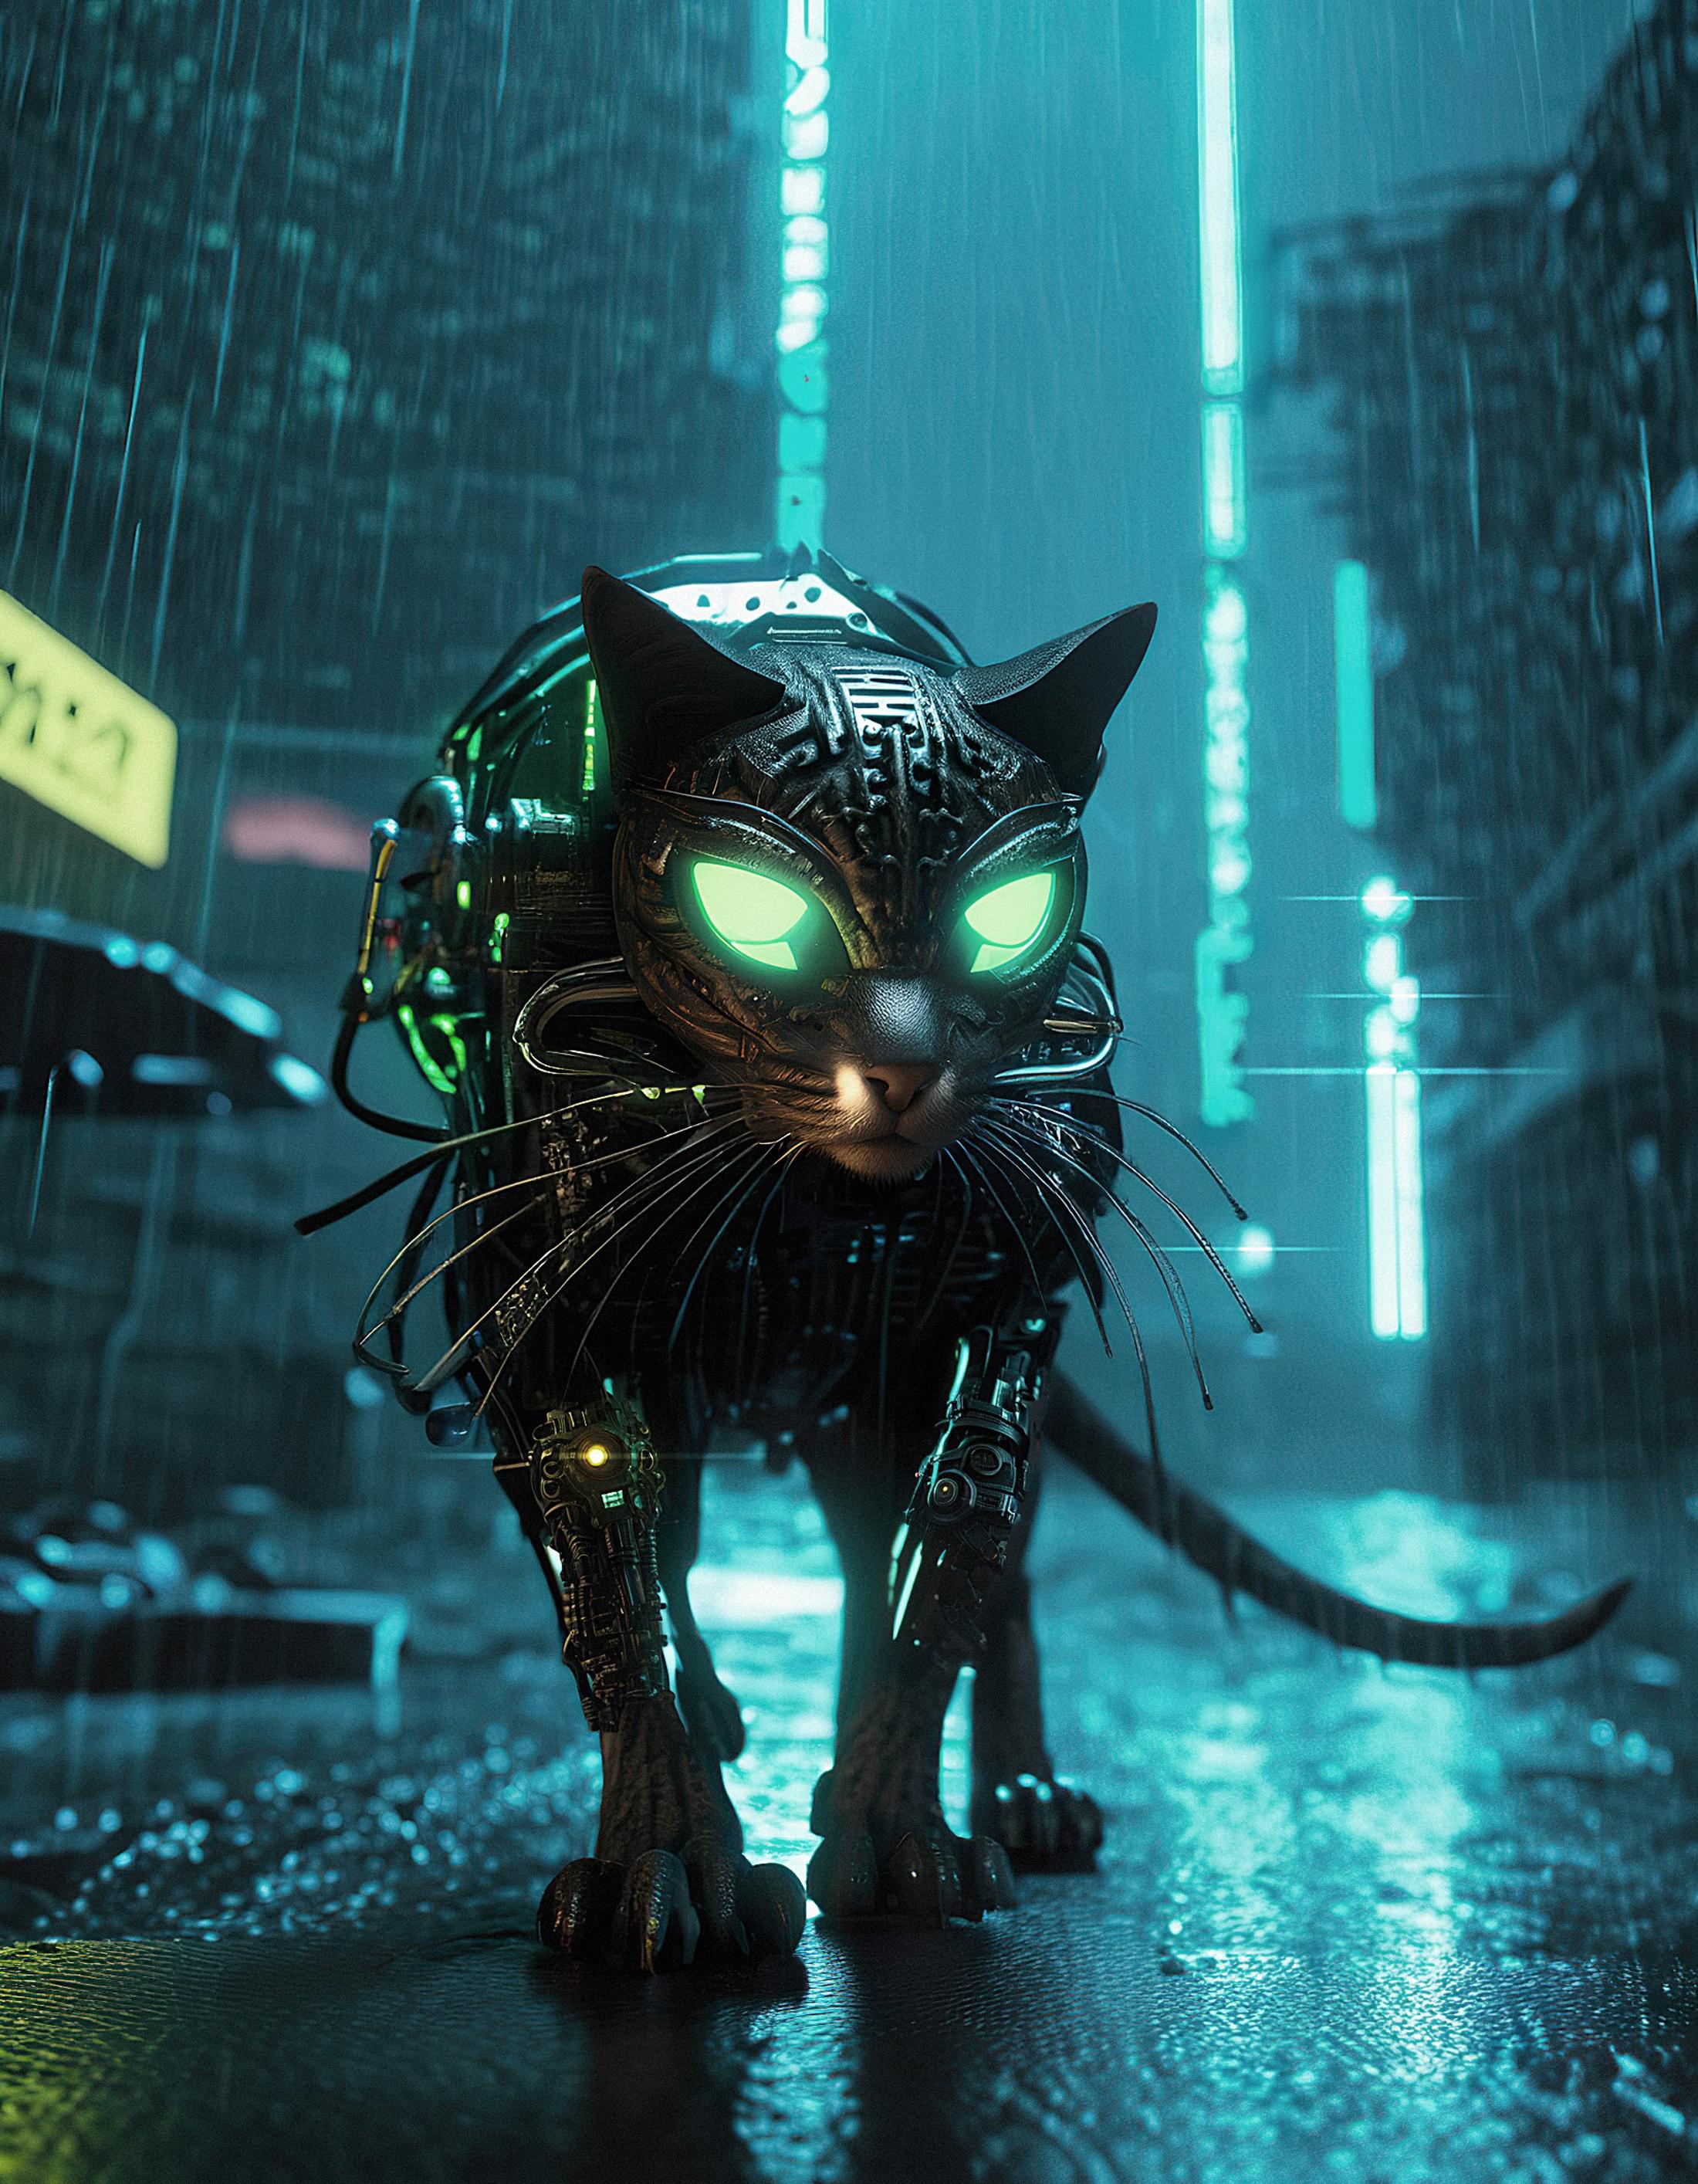 A neon green cat with glowing eyes and a glowing collar on a dark street.